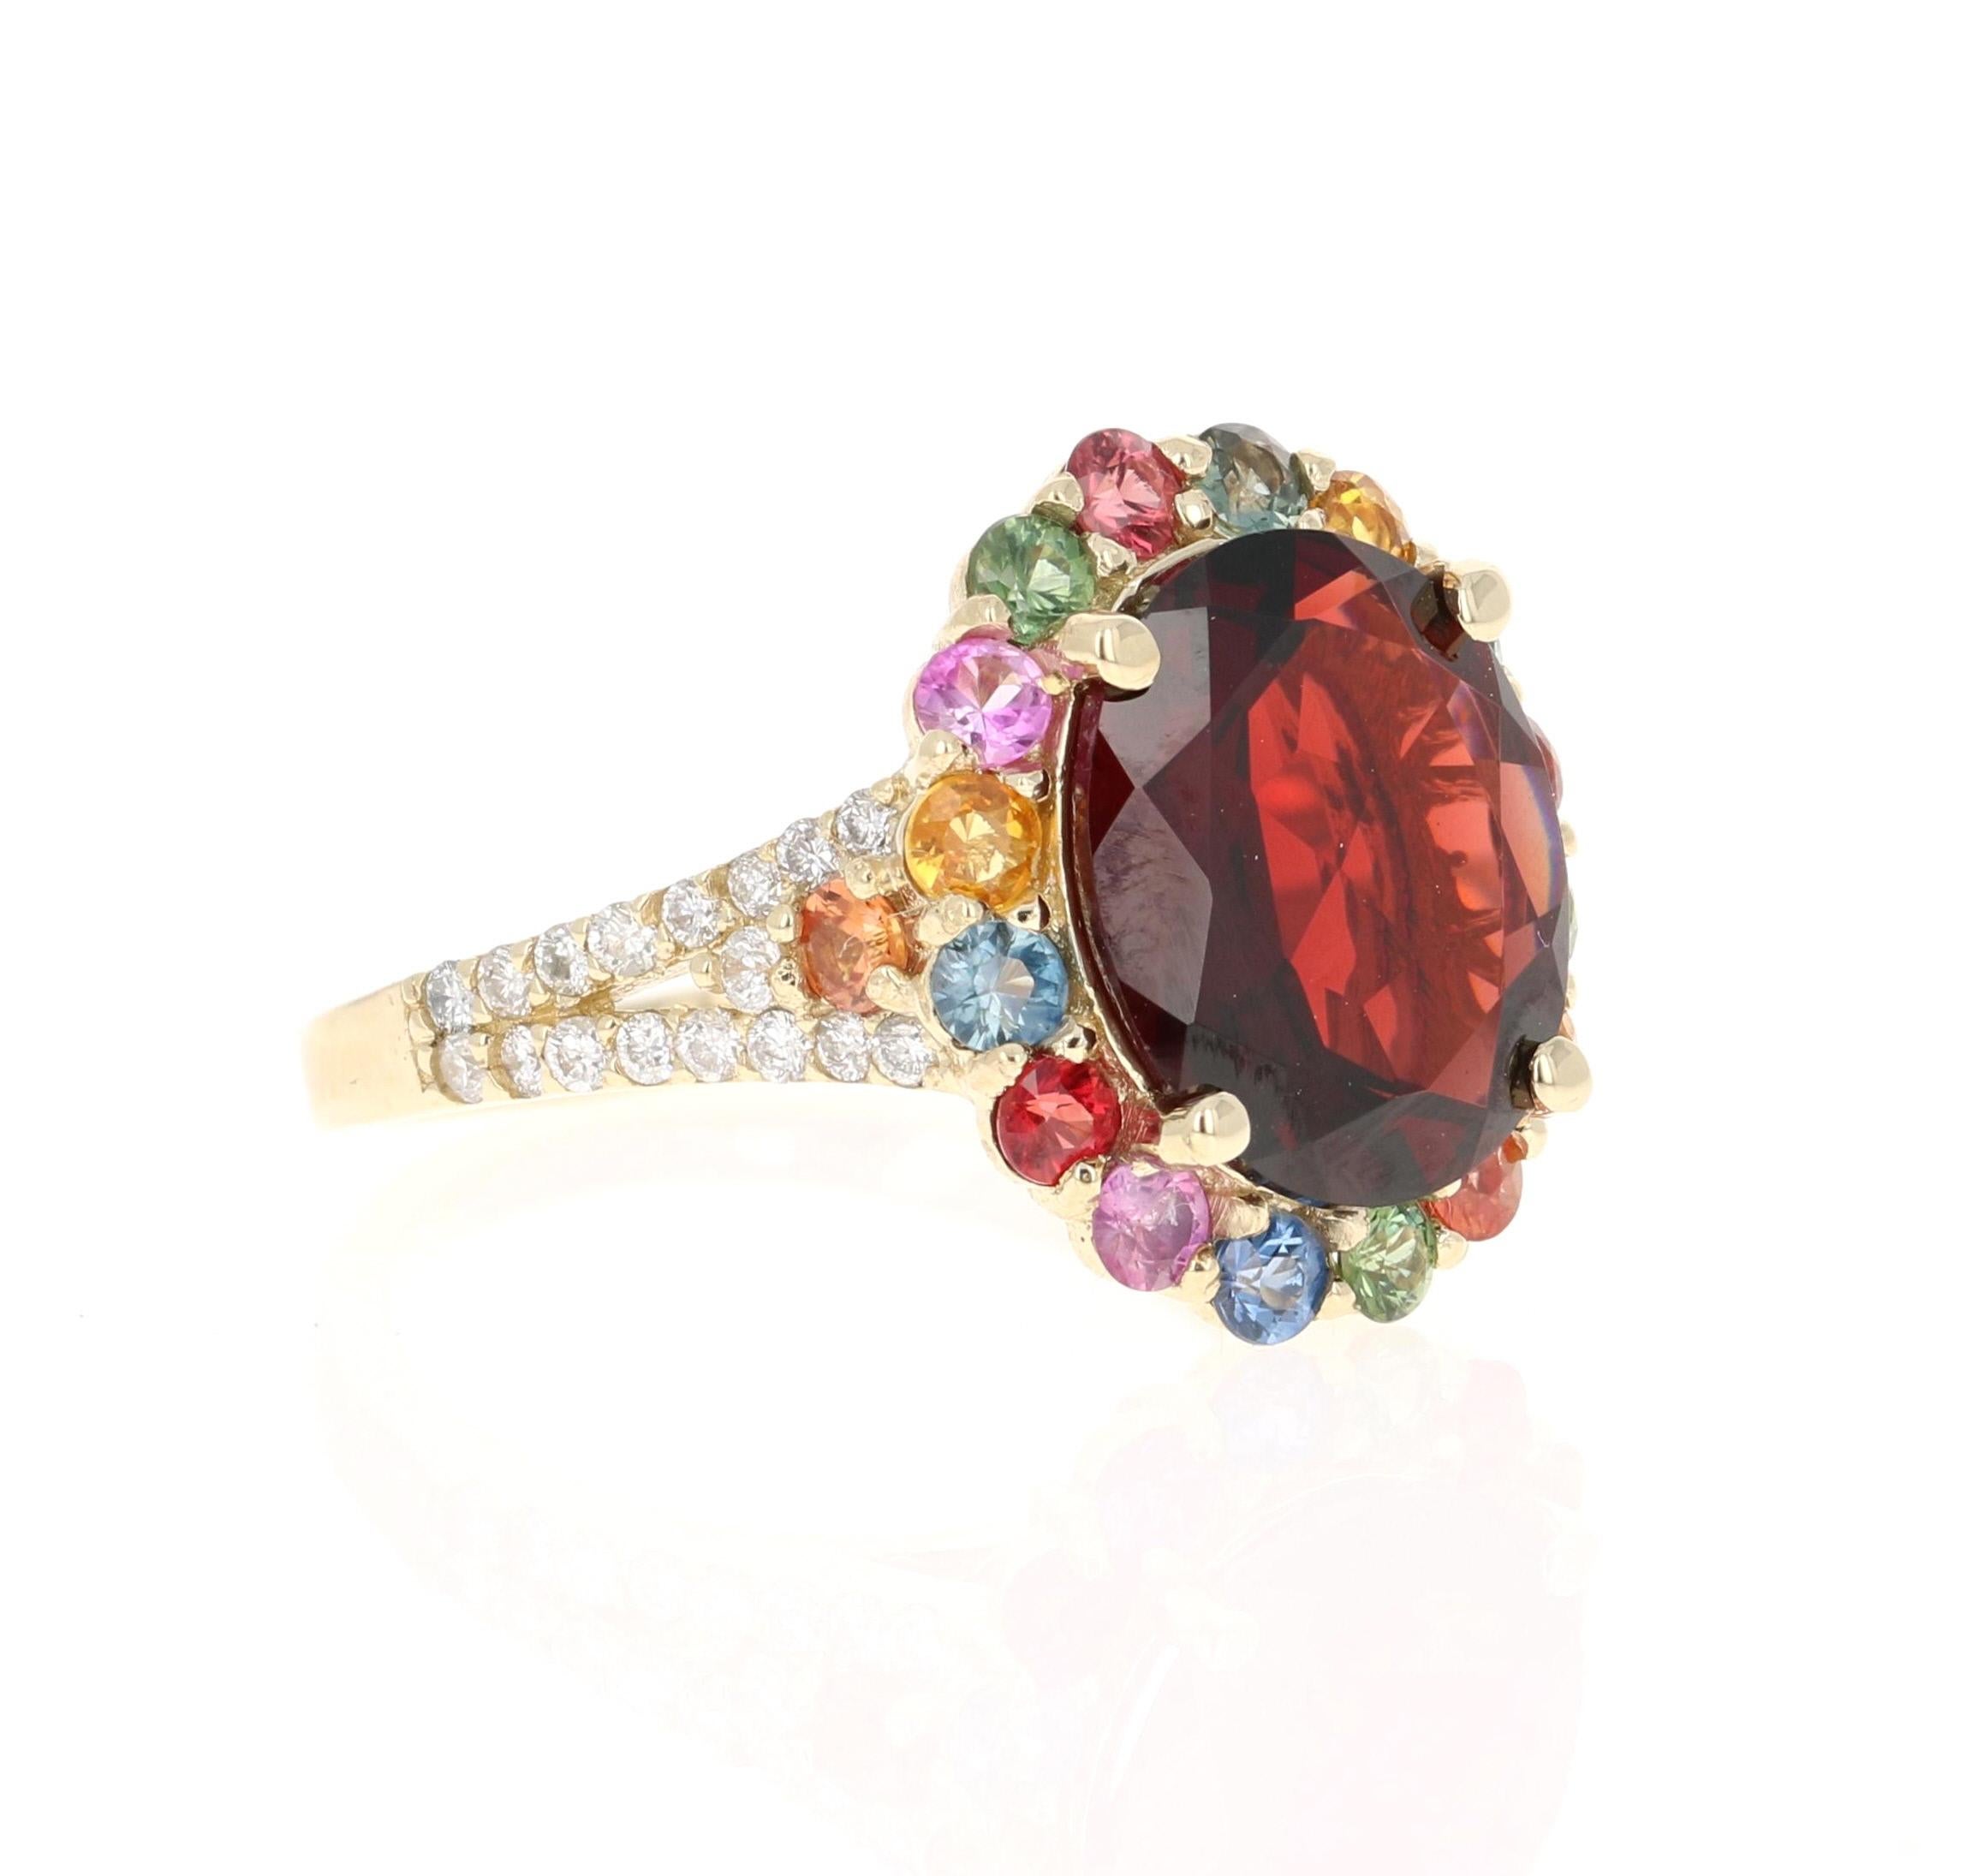 This ring has a Oval Cut Garnet weighing 4.80 carats and is surrounded by multicolored sapphires weighing 1.32 carats. In addition to the sapphires there are 34 Round Cut Diamonds that weigh 0.34 carats. The total carat weight of the ring is 6.46